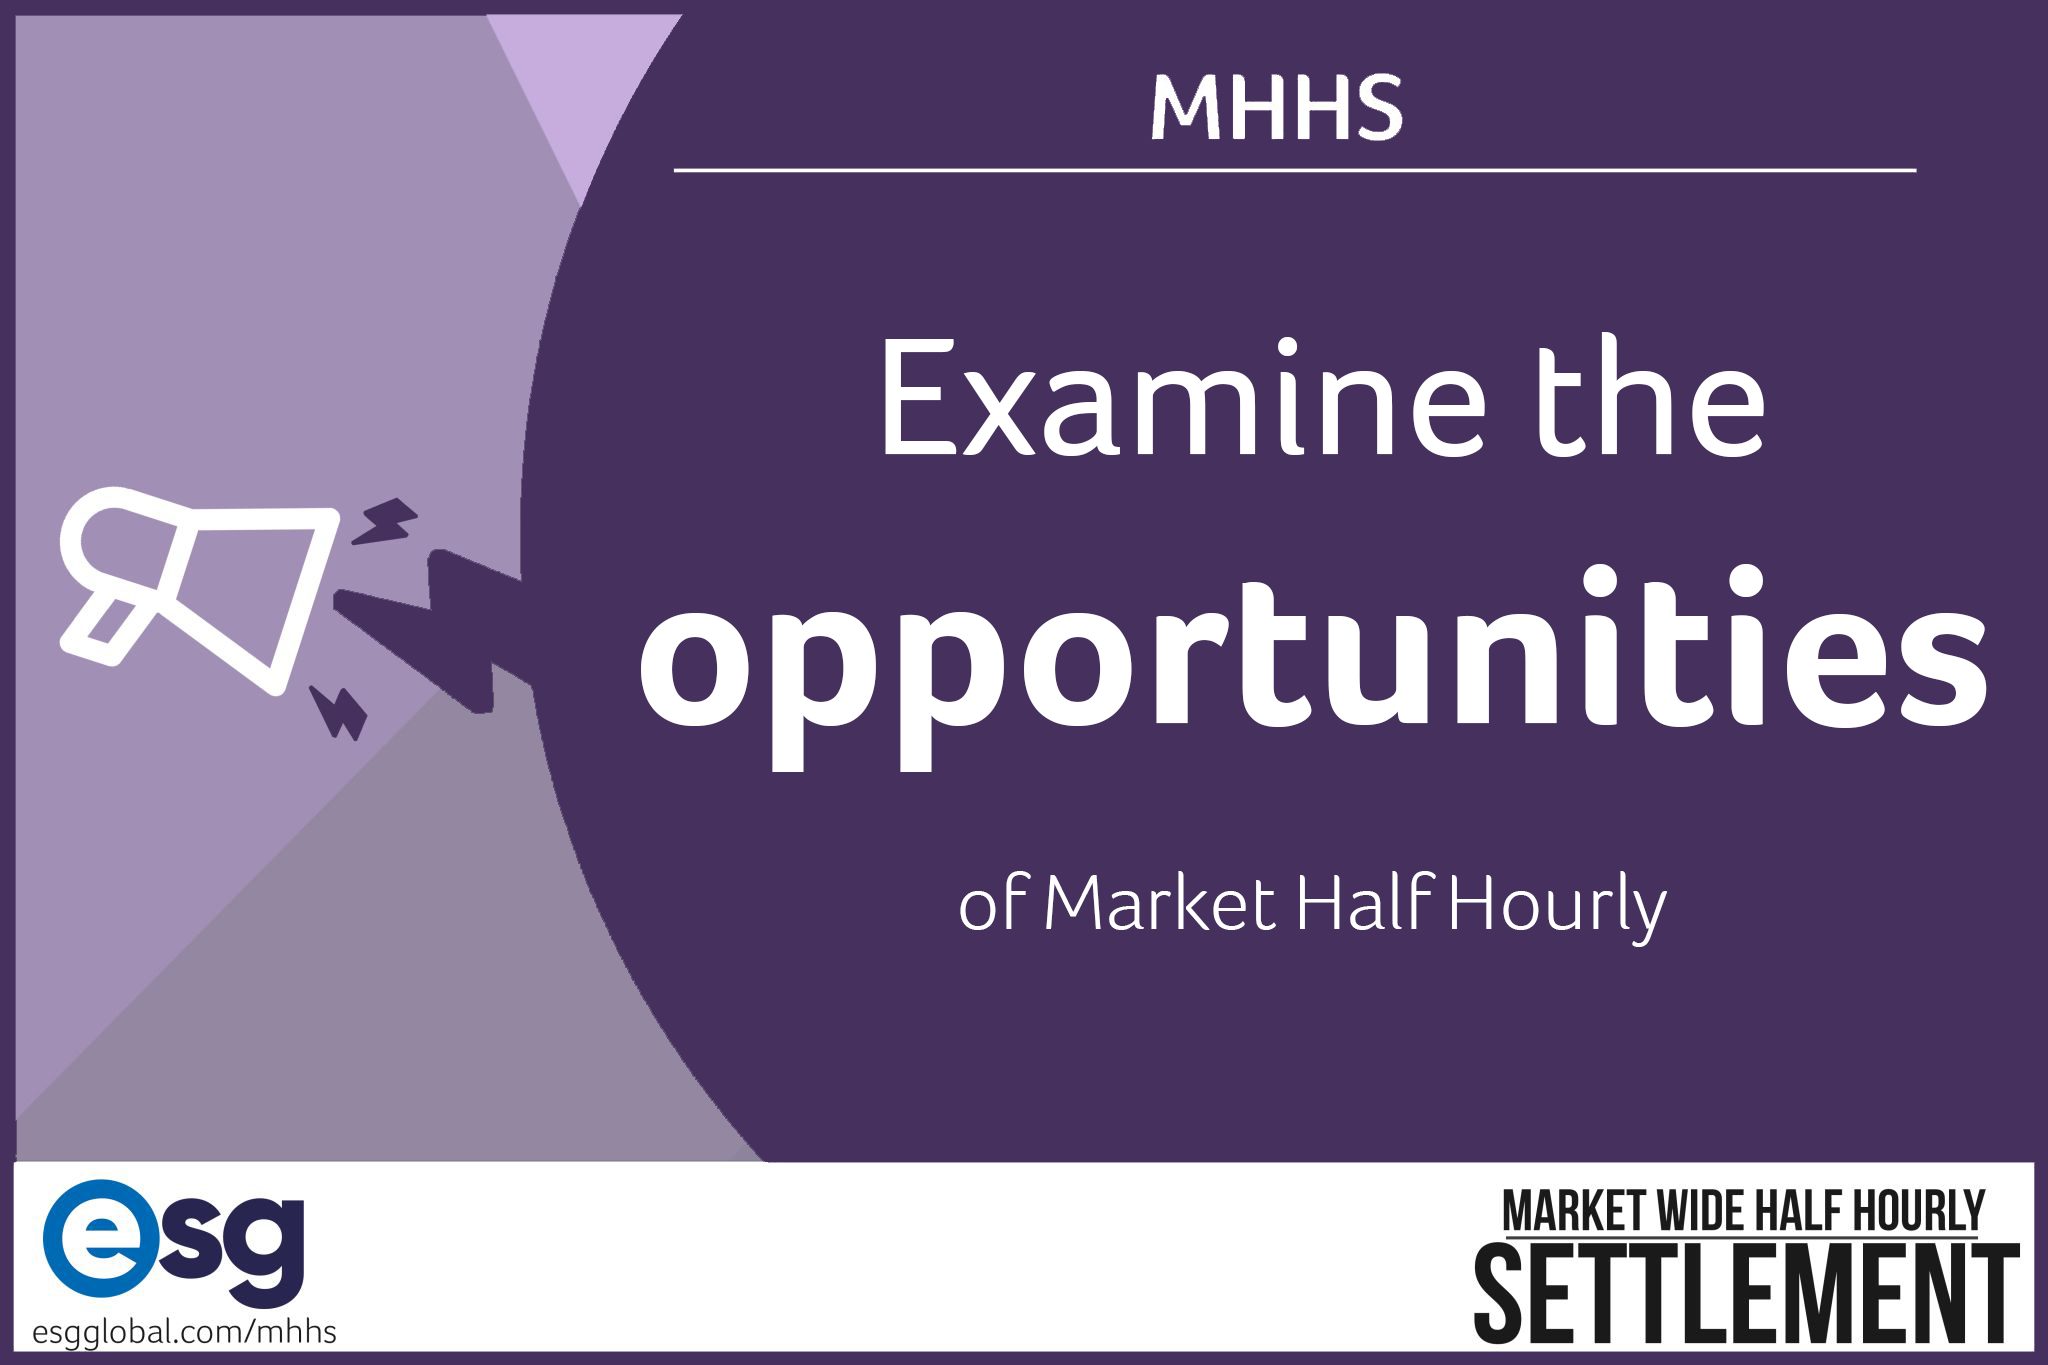 MHHS – Examine the opportunities